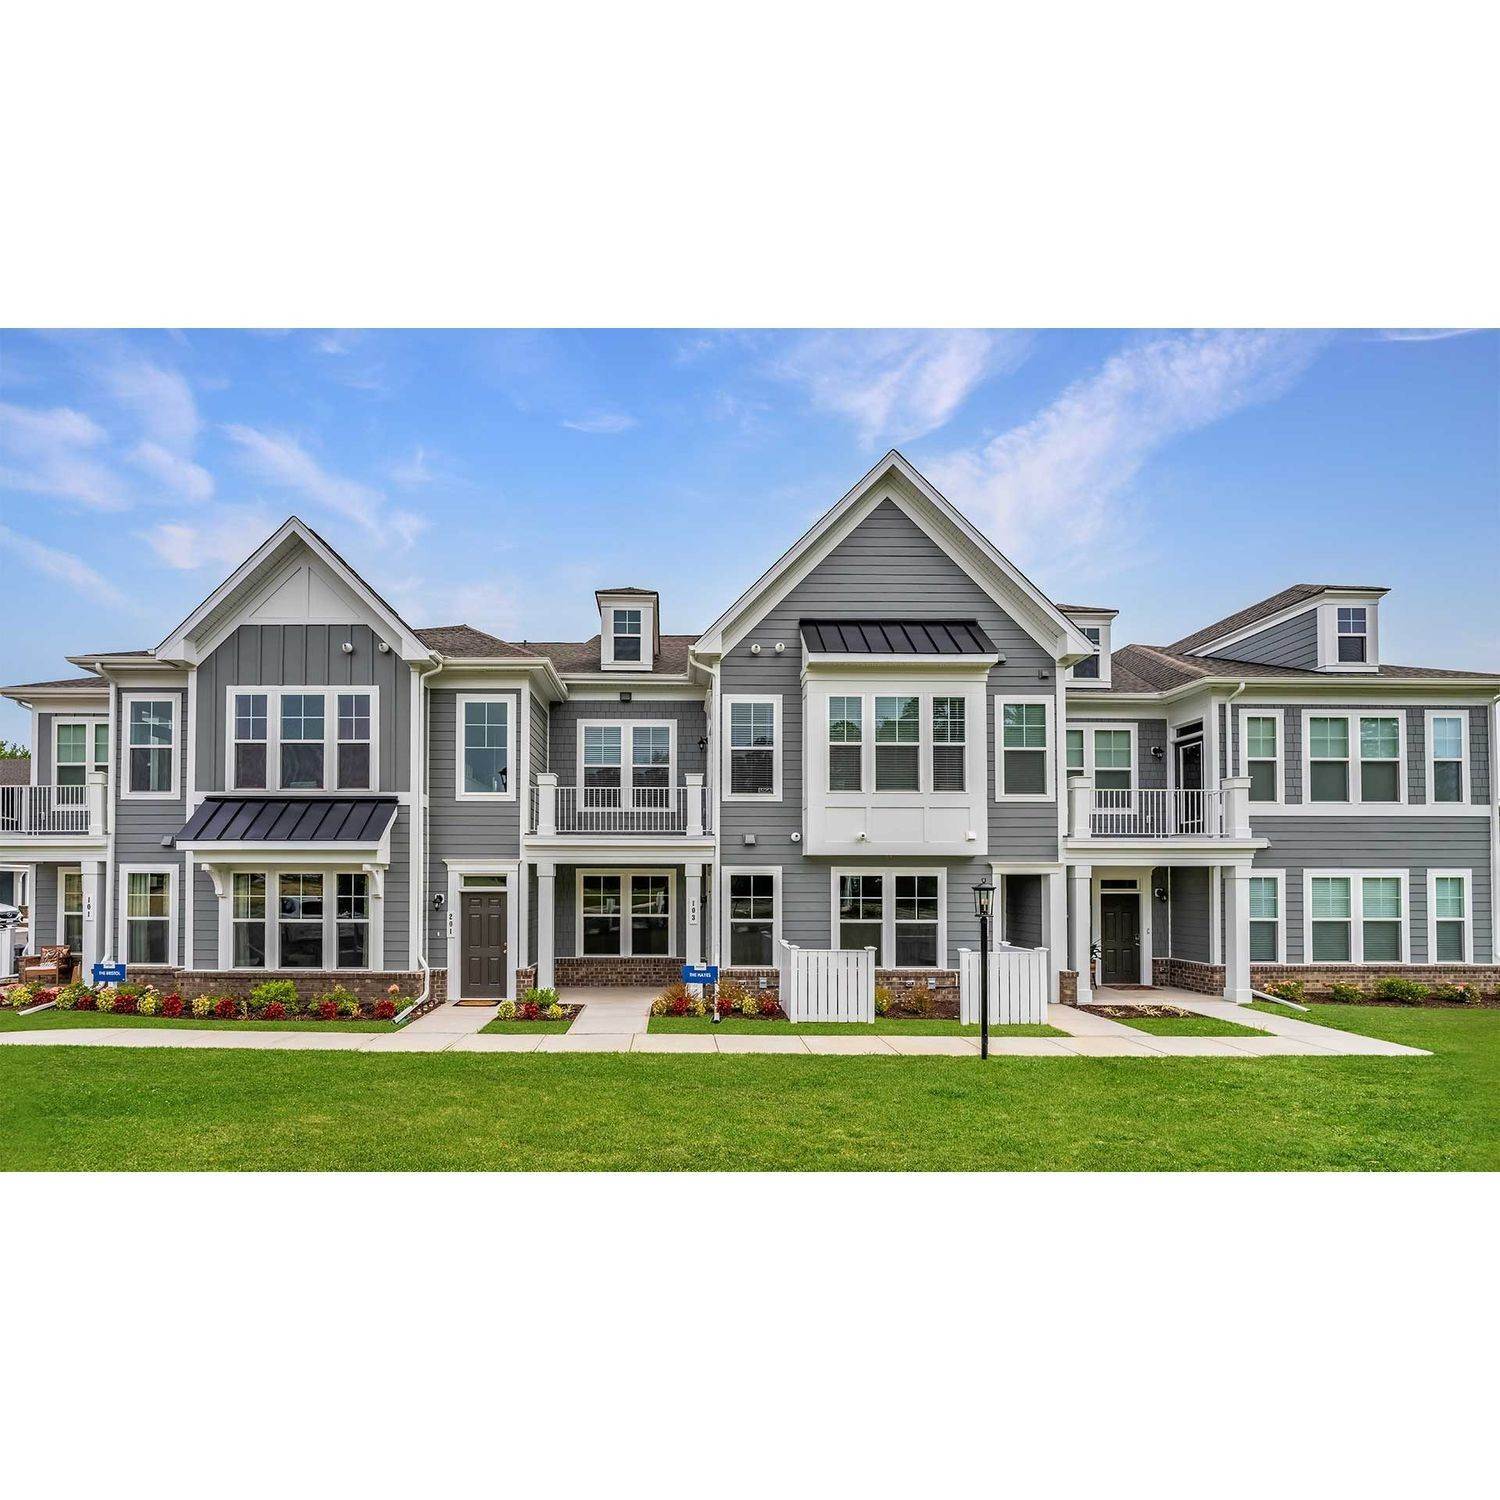 4. The Pointe at Twin Hickory建於 4605 Pouncey Tract Road, Glen Allen, VA 23059